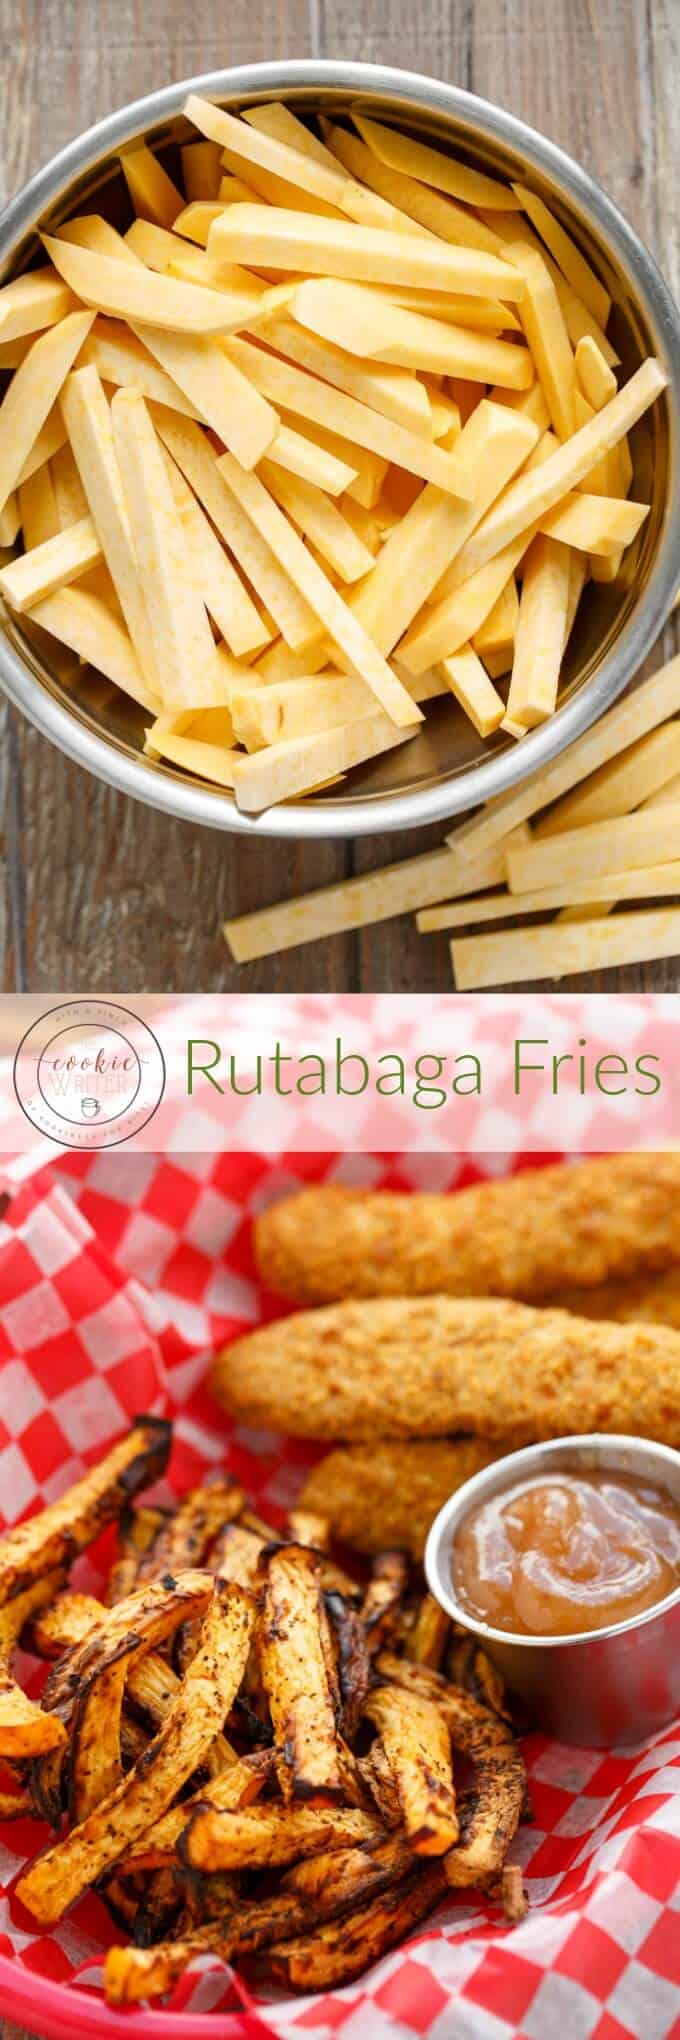 Rutabaga Fries using Leftovers - The Cookie Writer